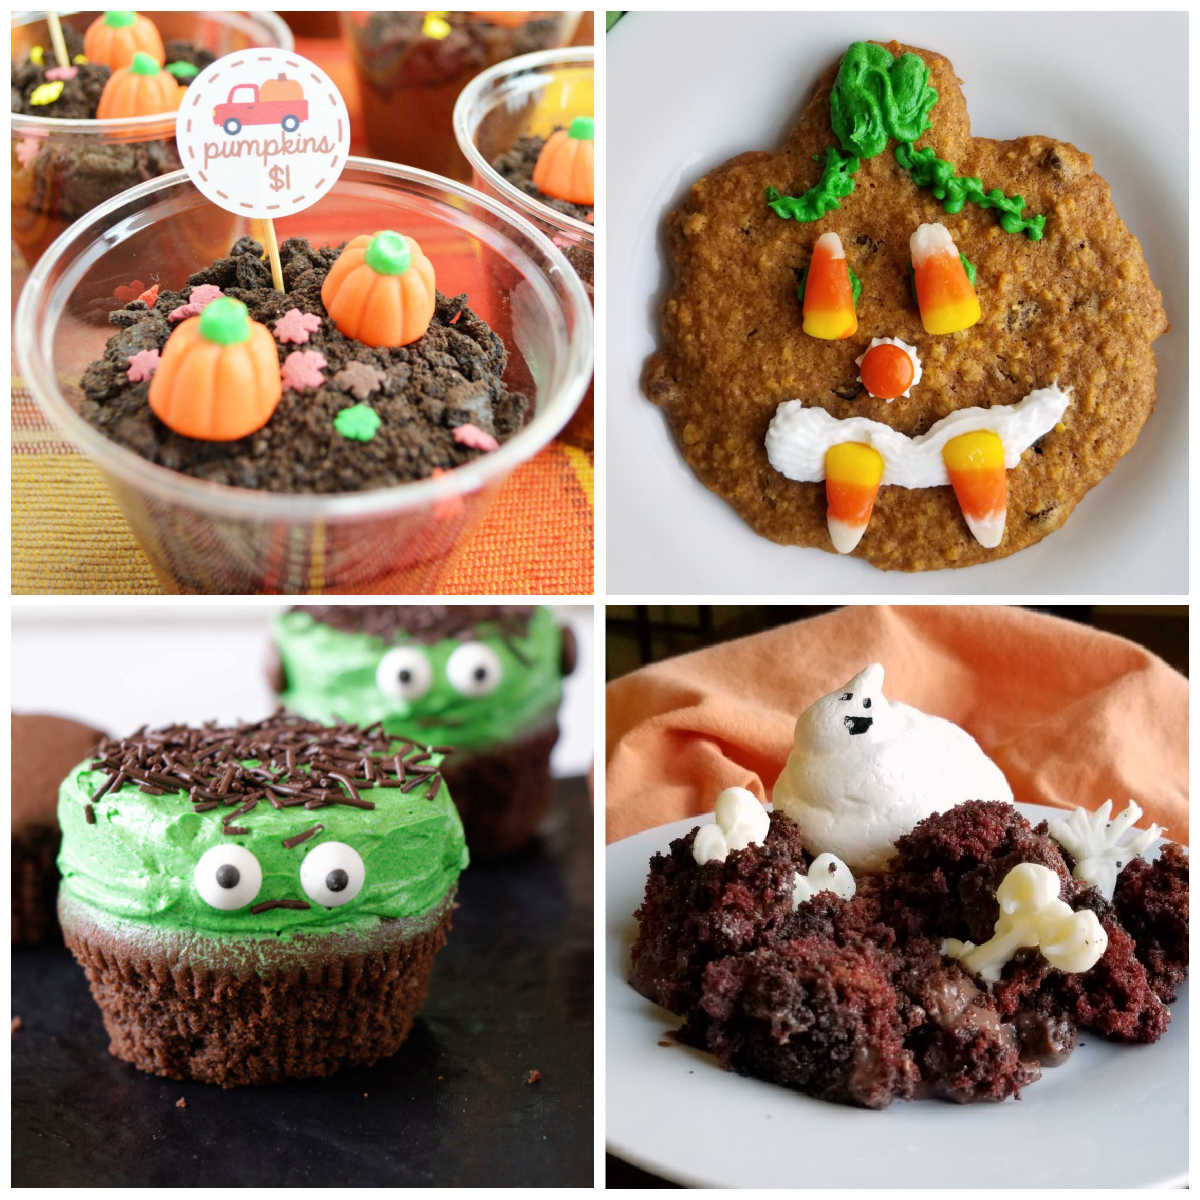 Collage of images of Halloween recipes including Frankenstein cupcakes, jack-o-lantern cookies, ghost chocolate trifle, and pumpkin patch dirt pudding cups.